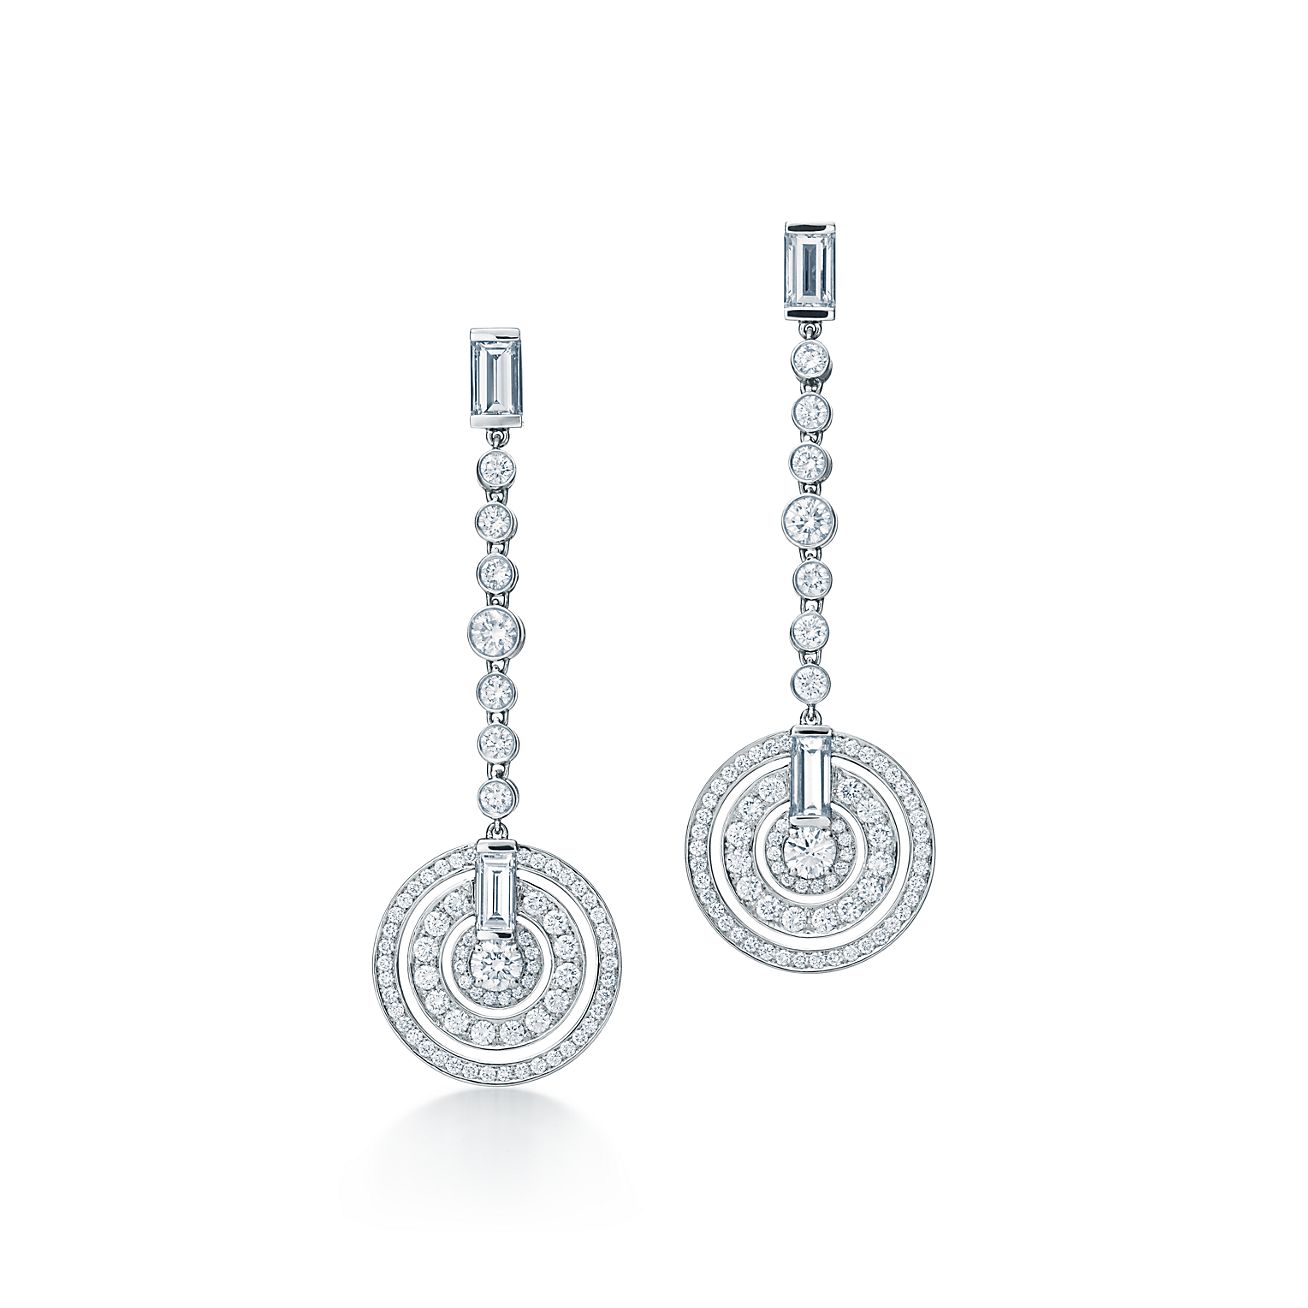 Earrings in platinum with round 